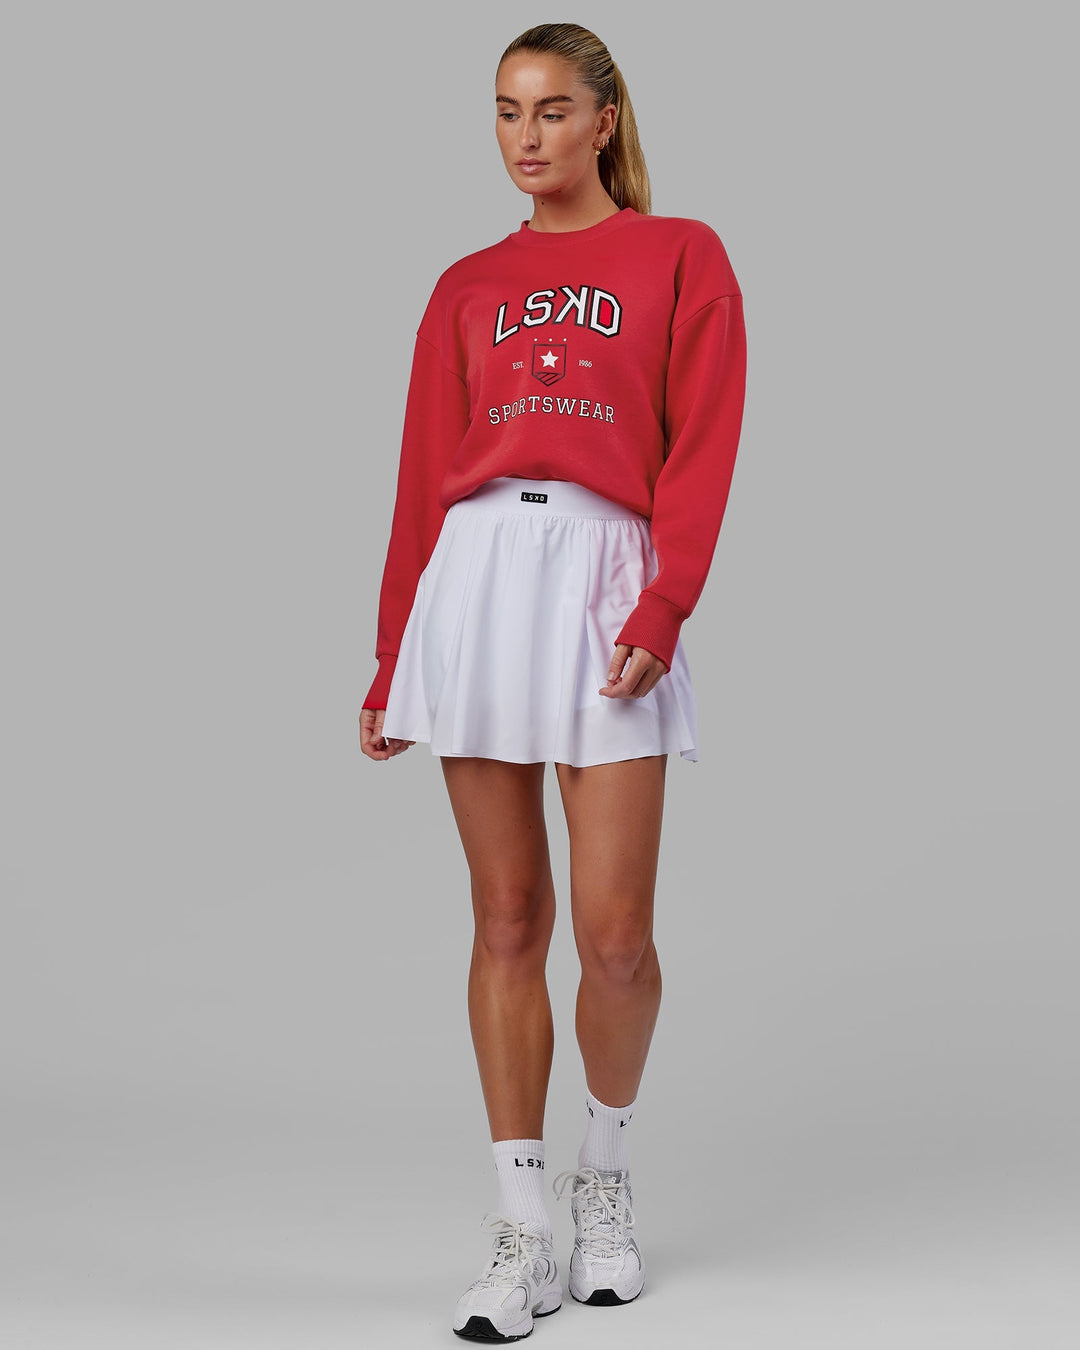 Sports Dept. Cropped Sweater - Scarlet